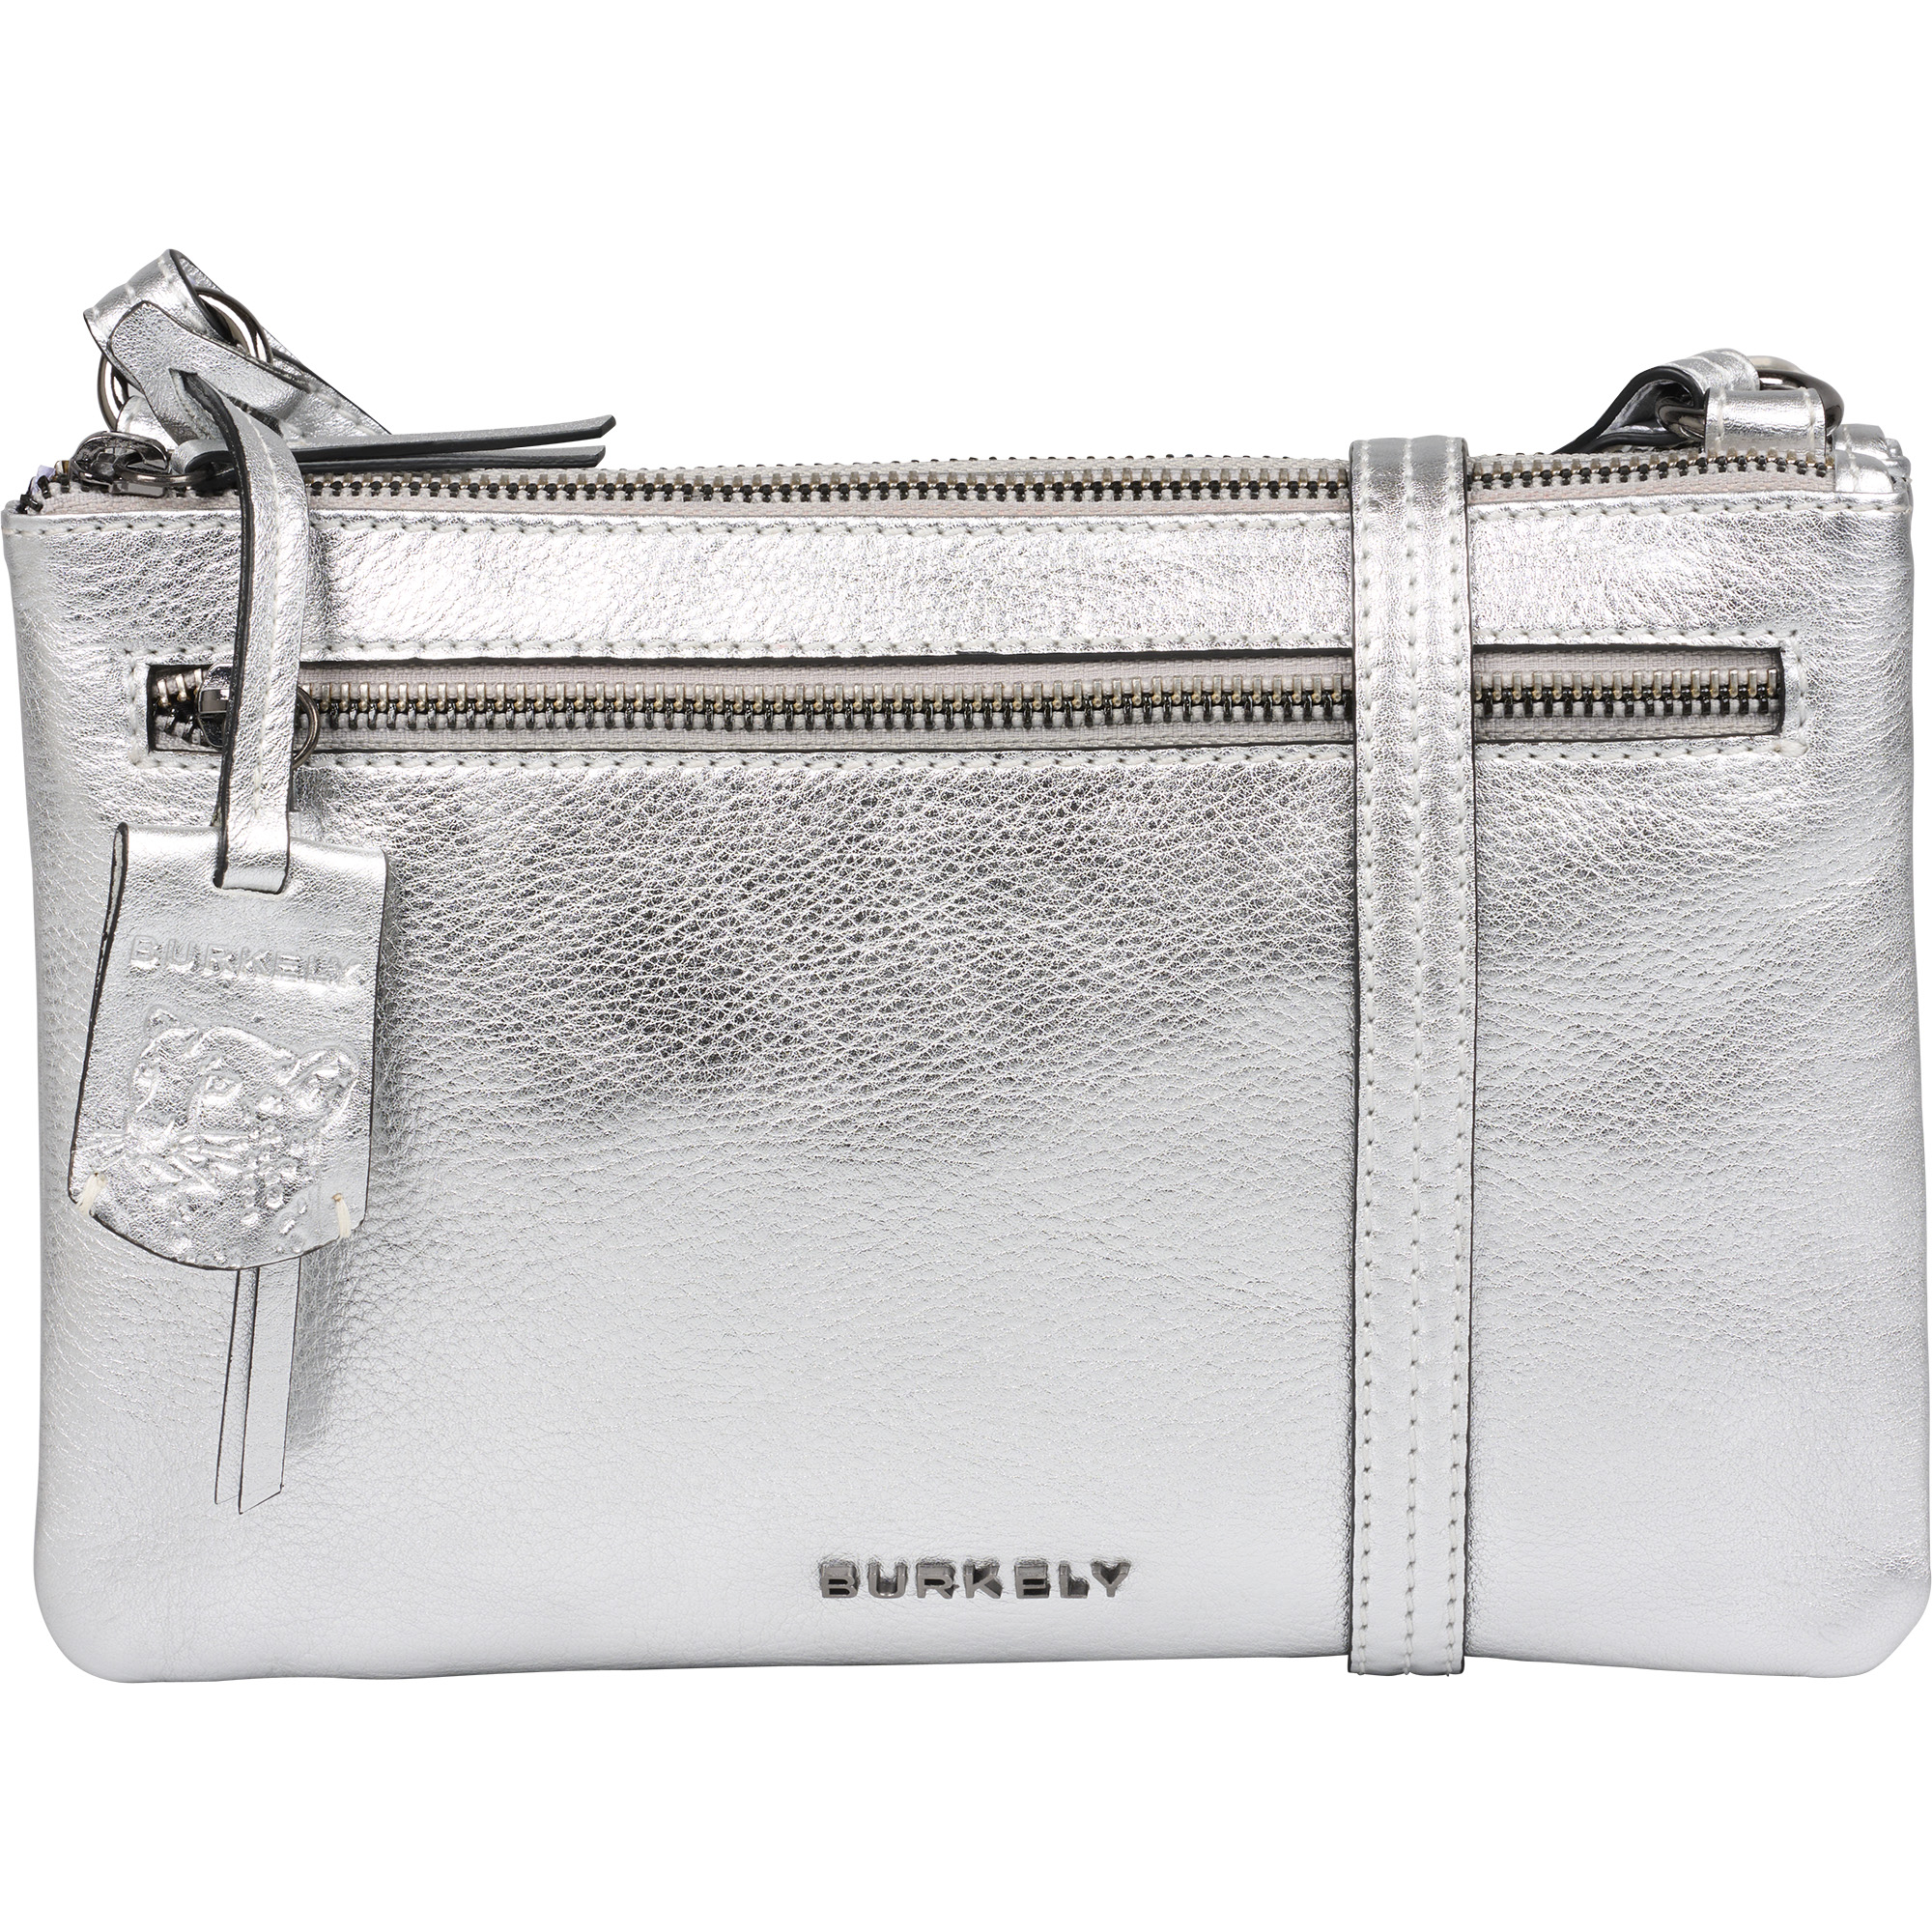 Burkely 1000716 Double Pocket Bag 64.11 Silver